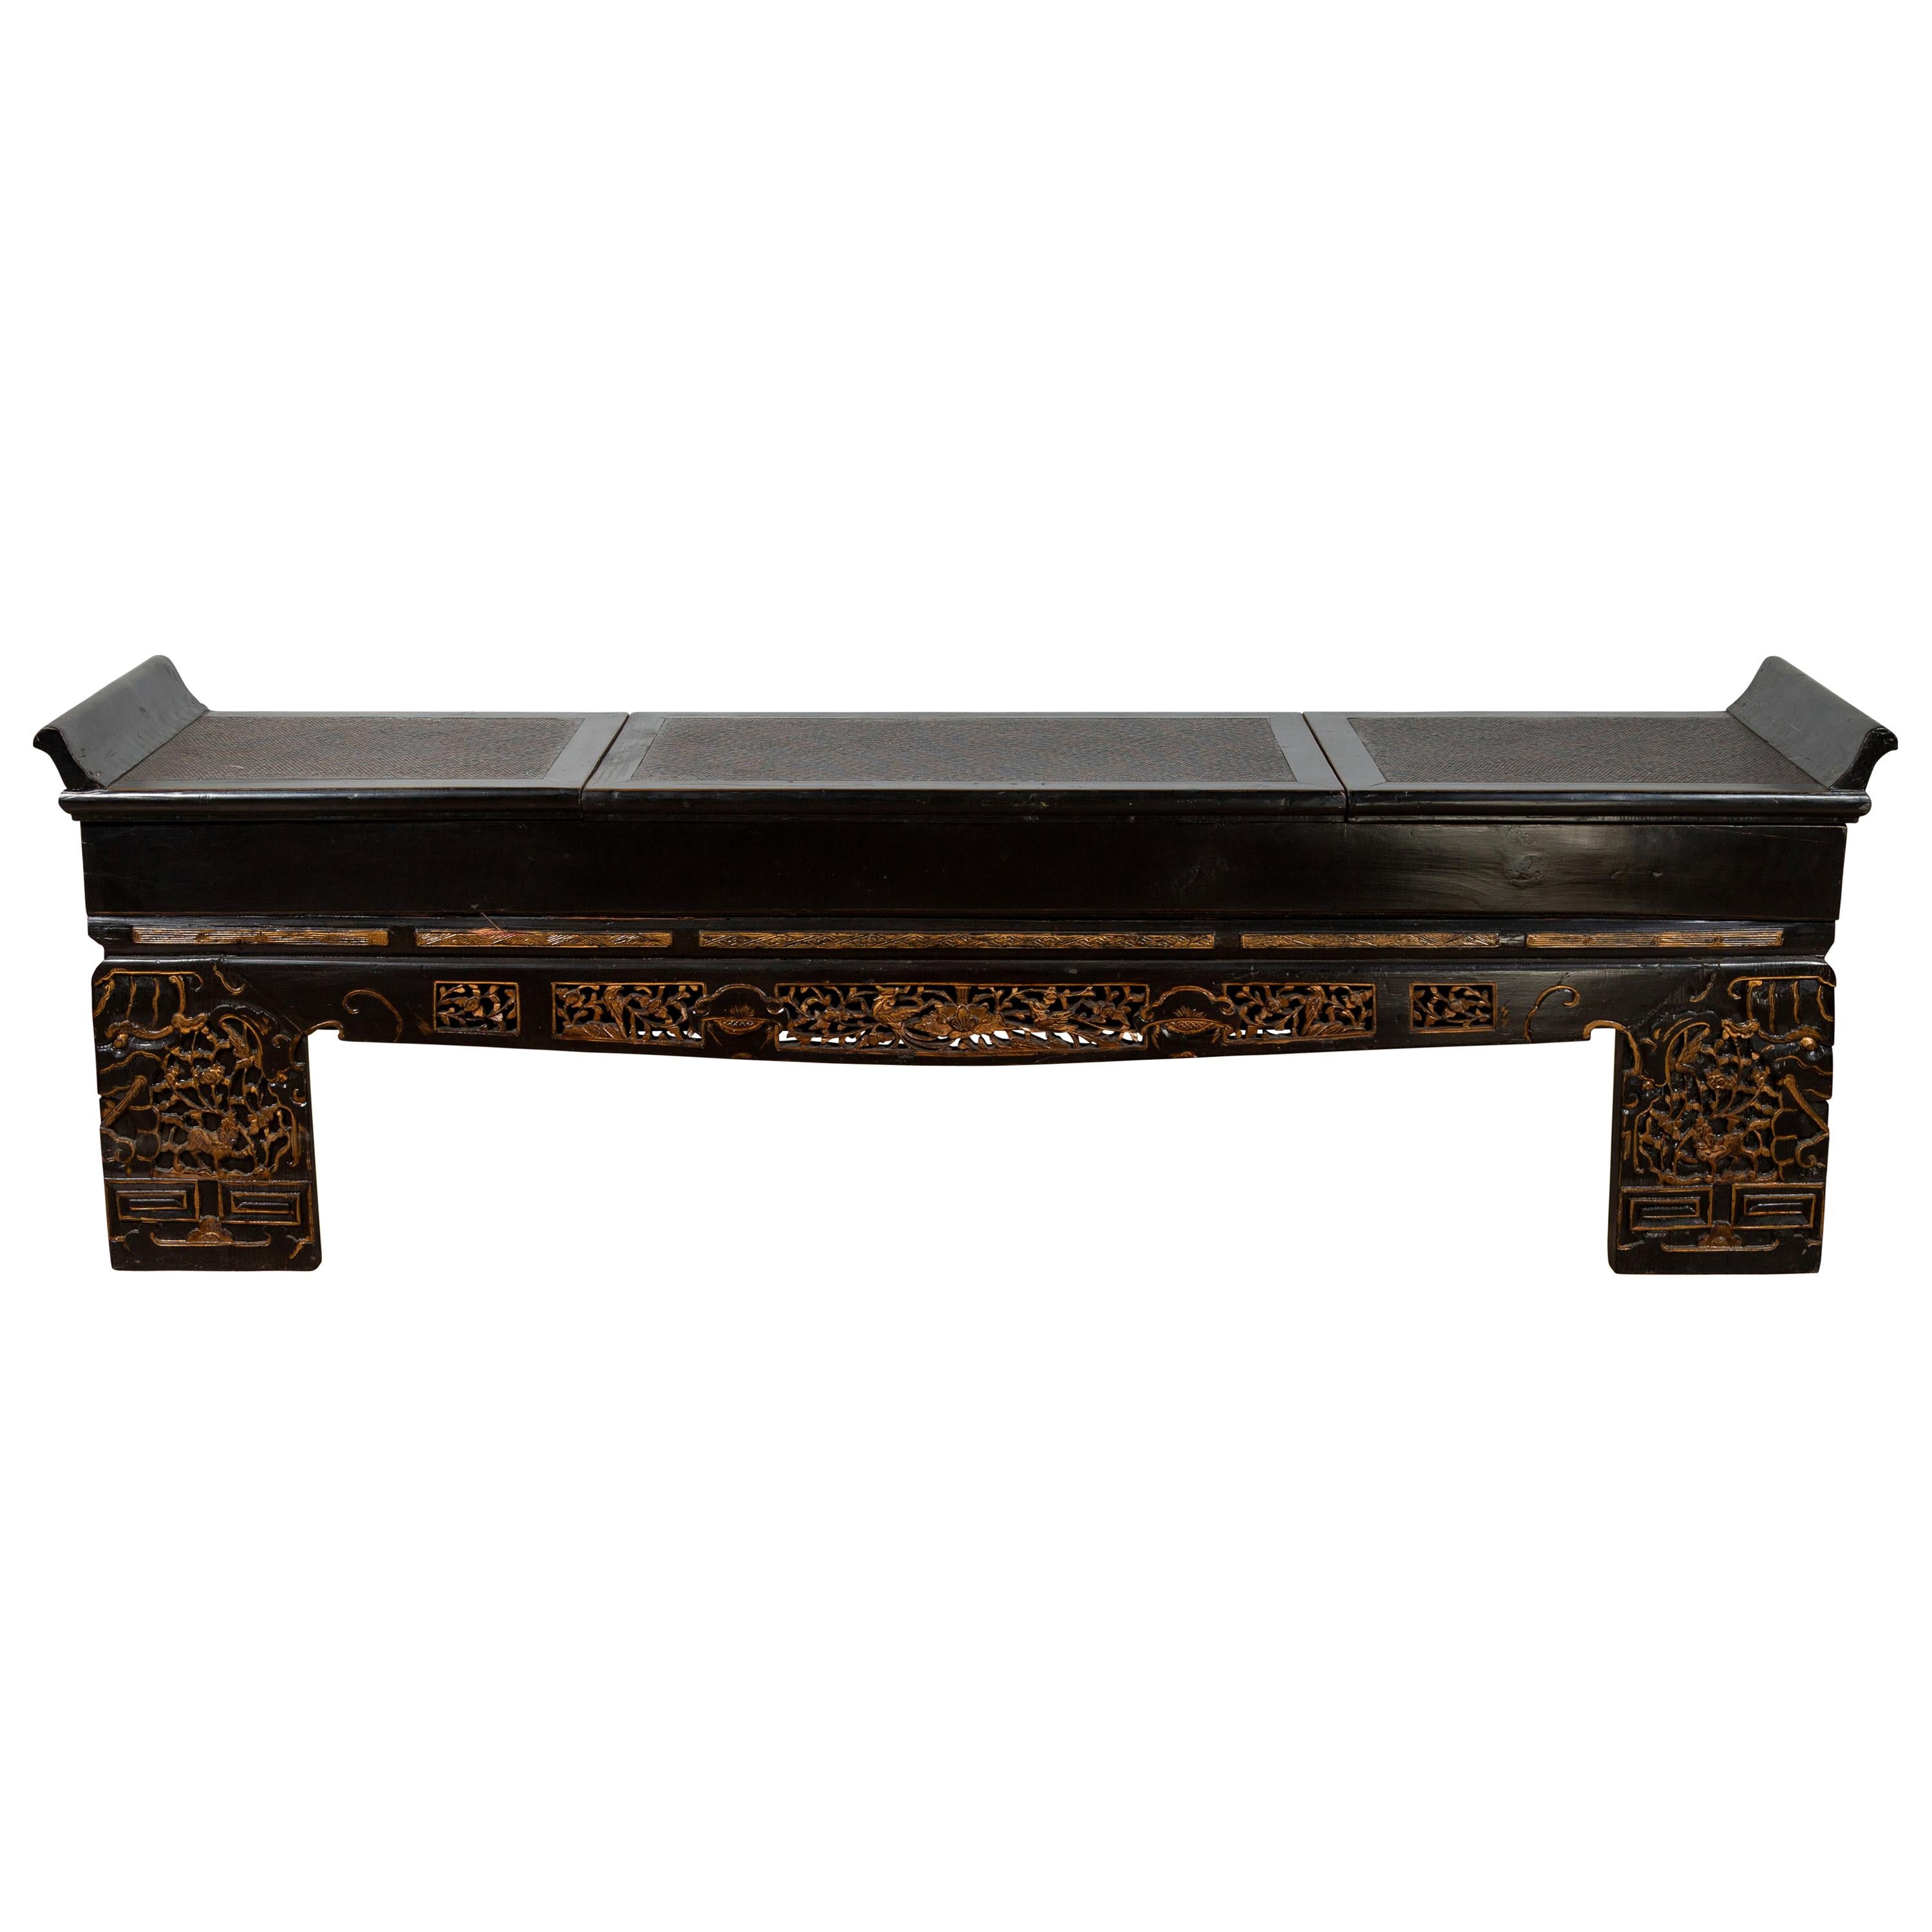 Antique Chinese Black Lacquered Bench with Hidden Storage, Rattan and Gilt Décor